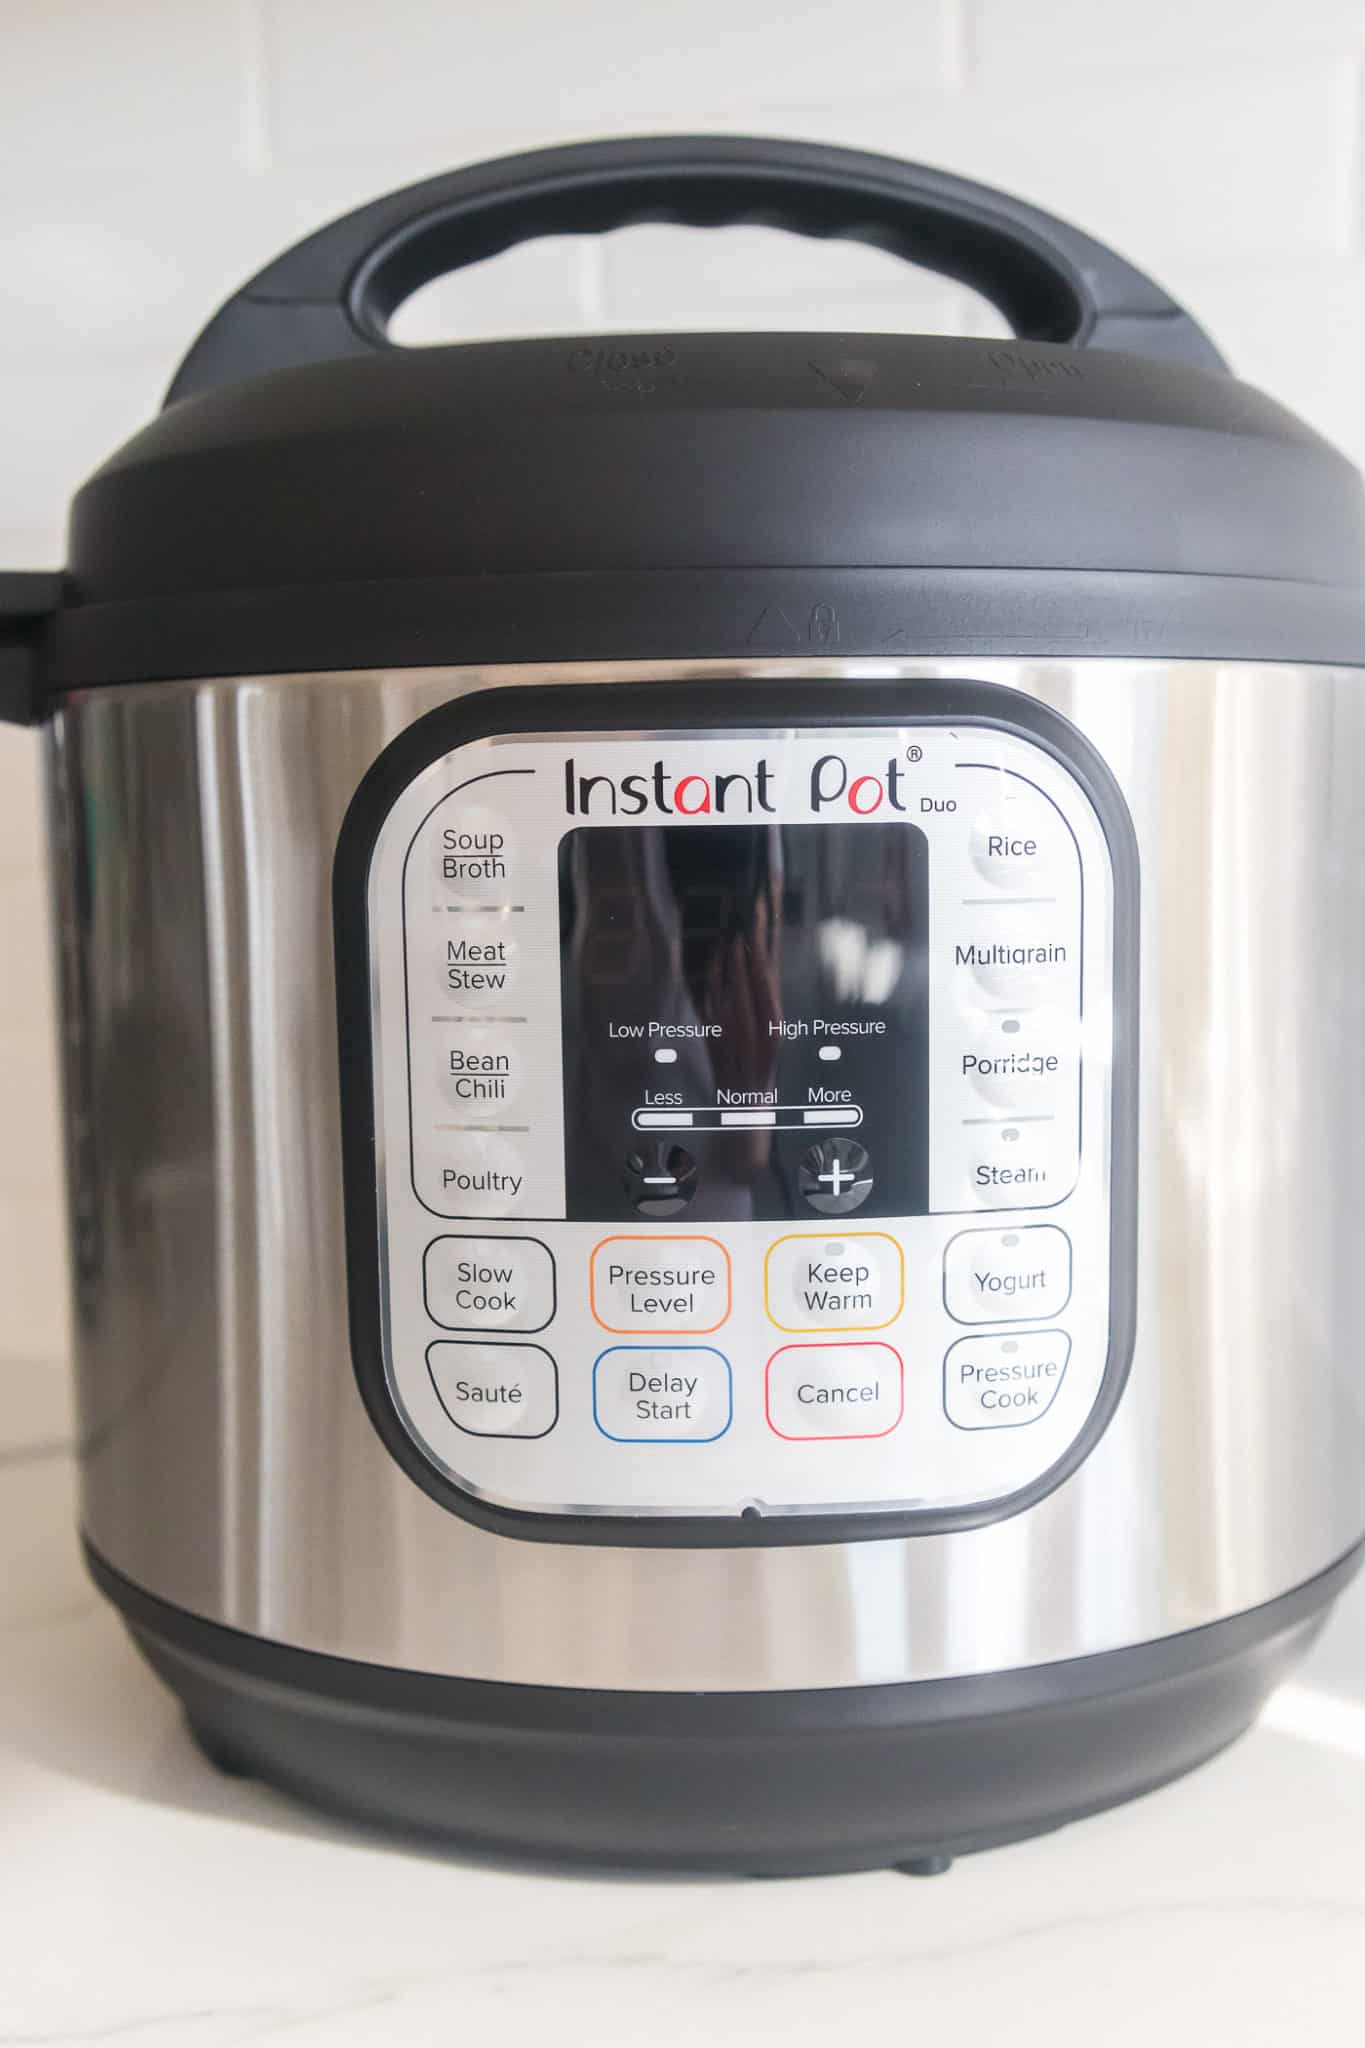 https://www.cleaneatingkitchen.com/wp-content/uploads/2021/02/how-to-use-instant-pot-duo-2-scaled.jpg